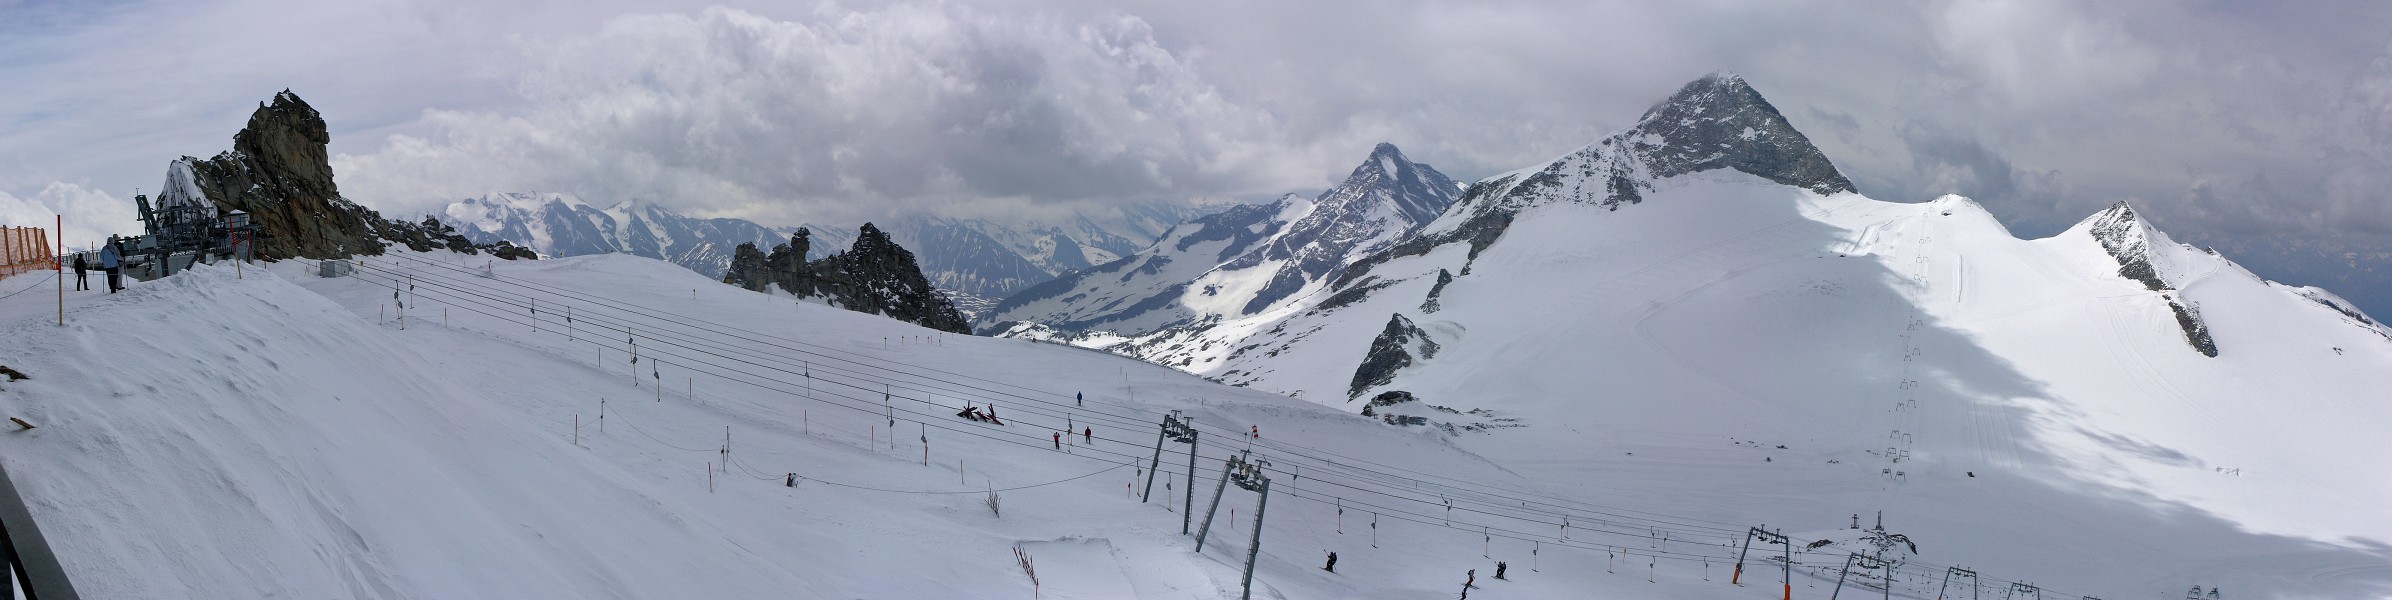 Hintertux top of chairlift view